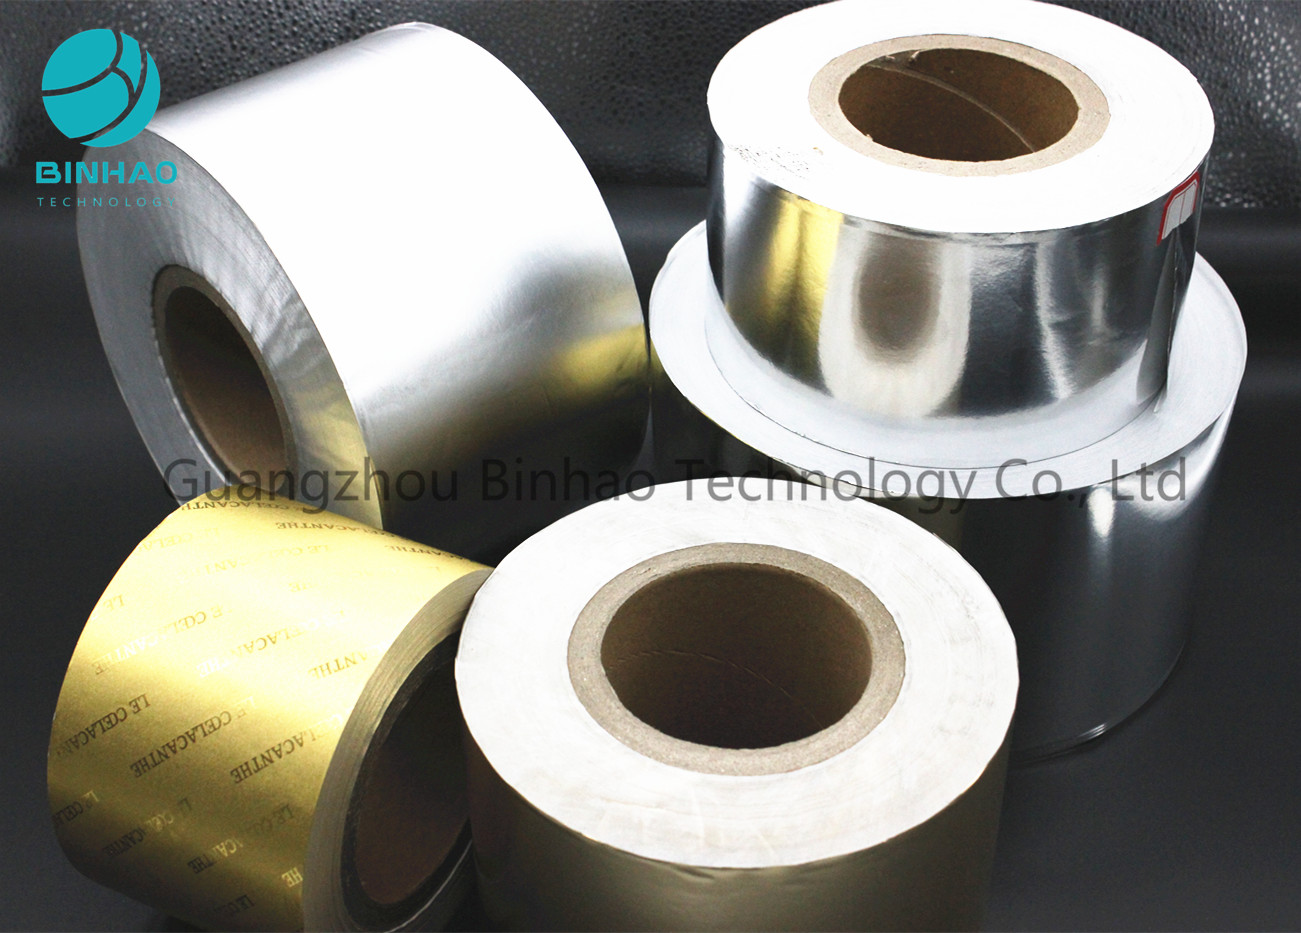 Bright Silver Gold Aluminum Tin Foil Wrapping Paper 50gsm - 80gsm Grammage